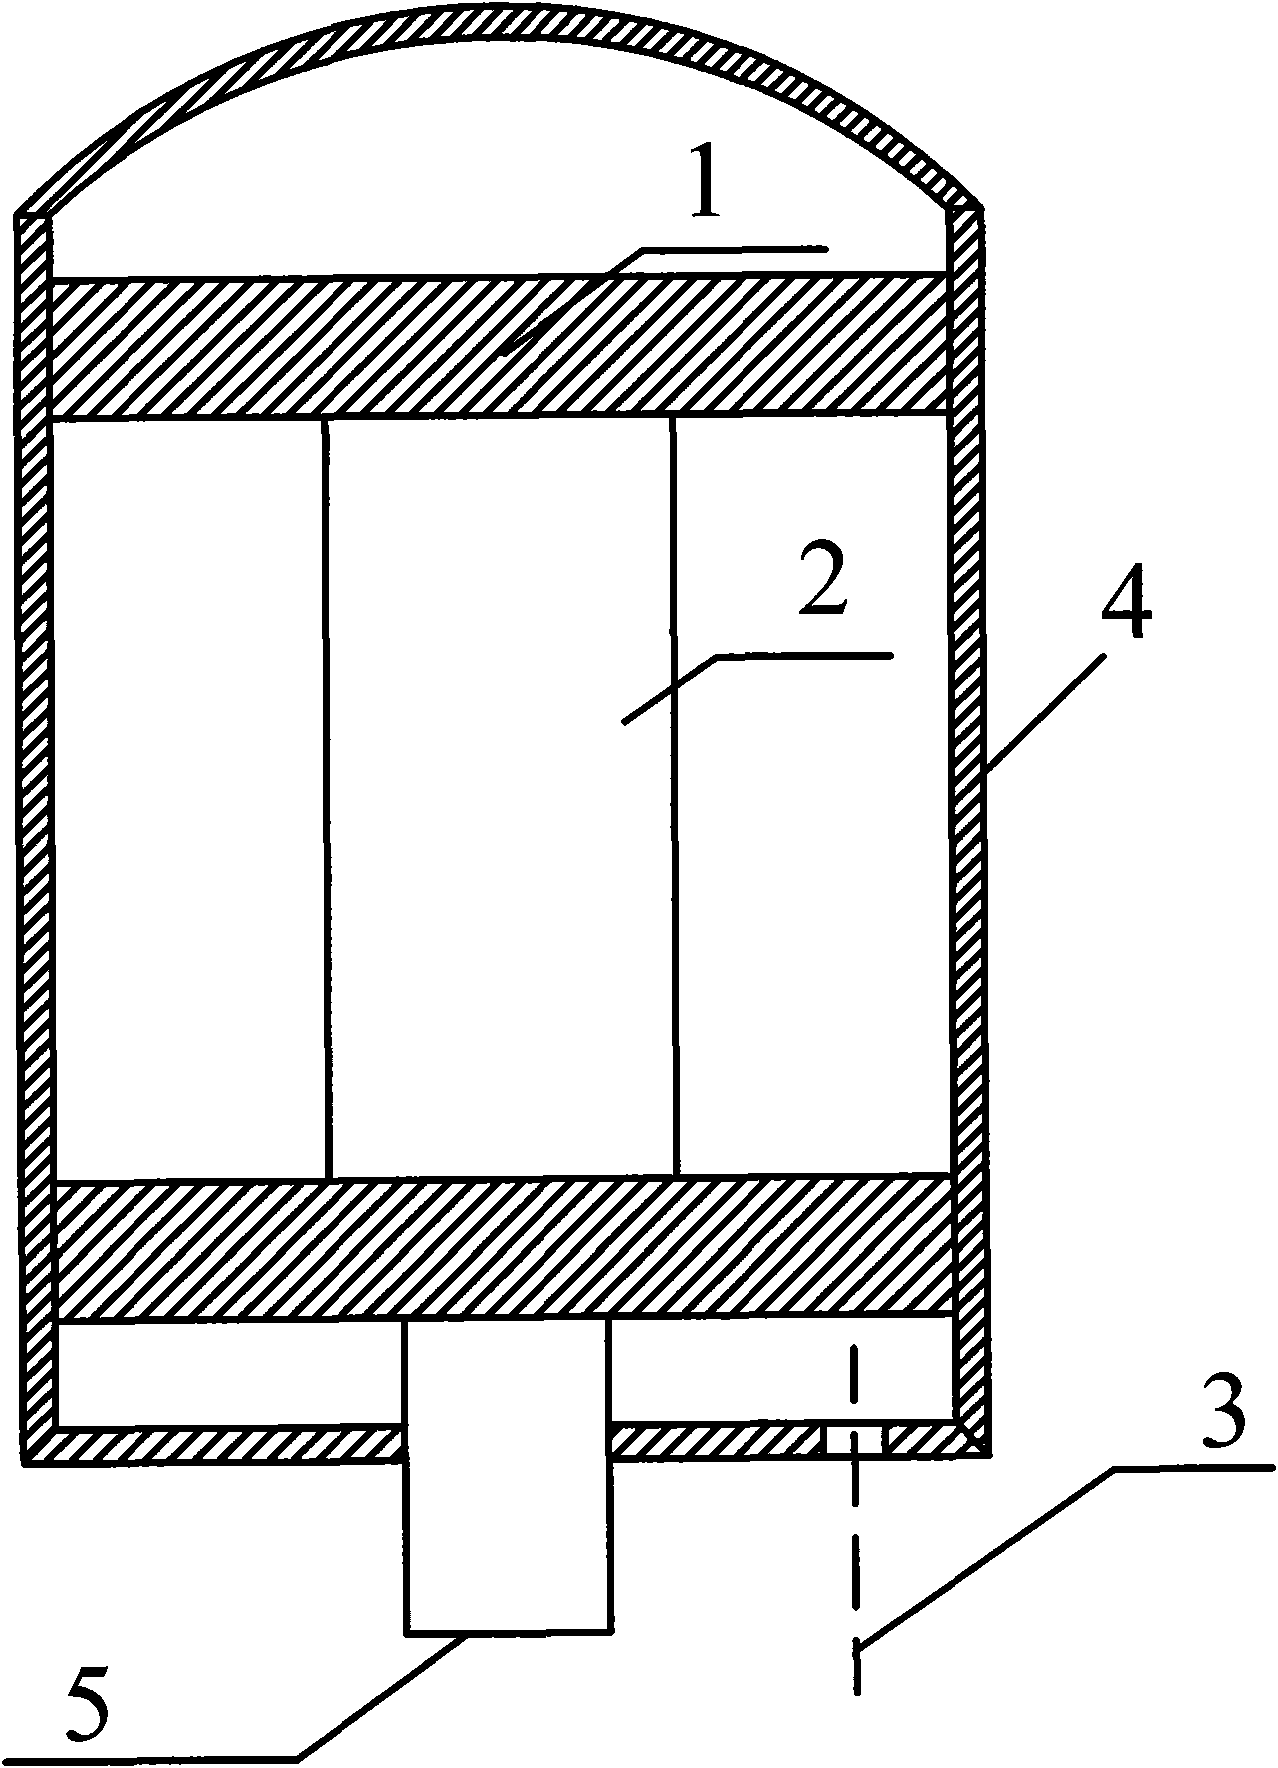 Device for monitoring pressure